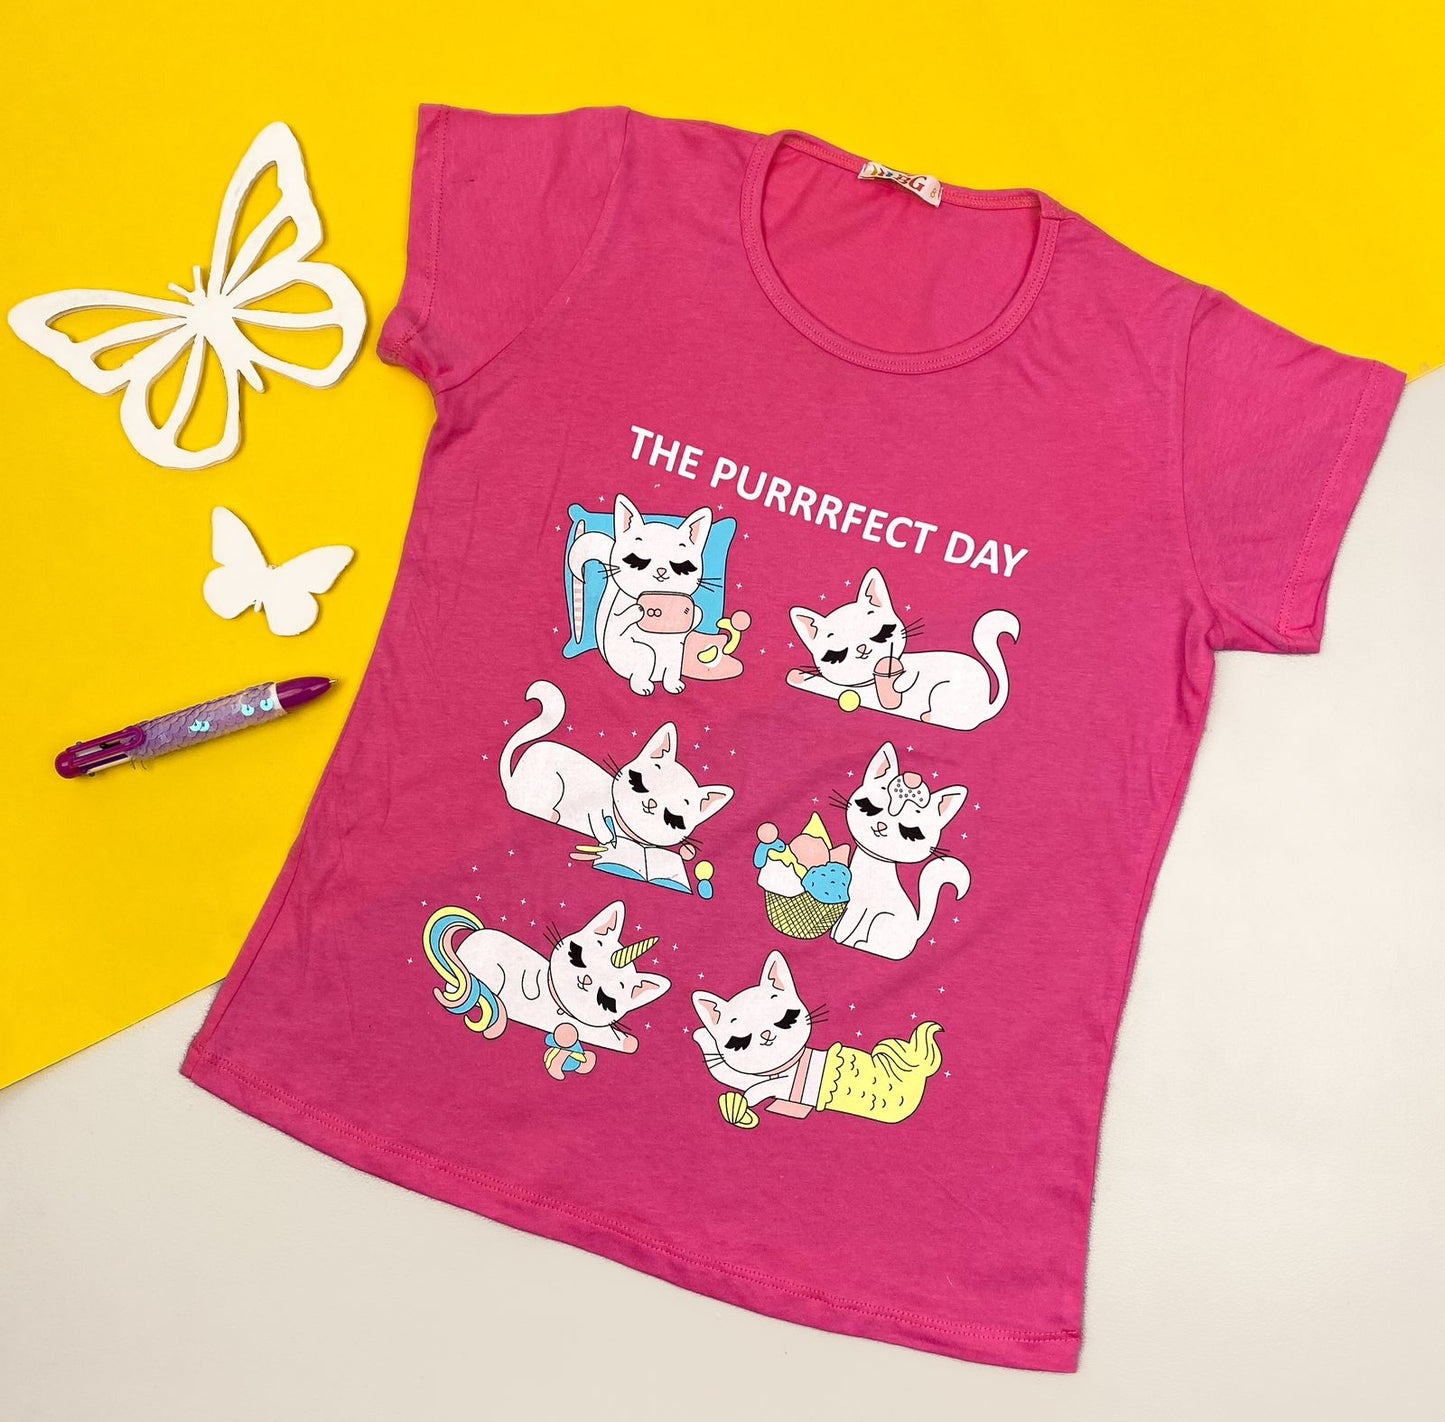 The Purrfect Day Girls T-shirt